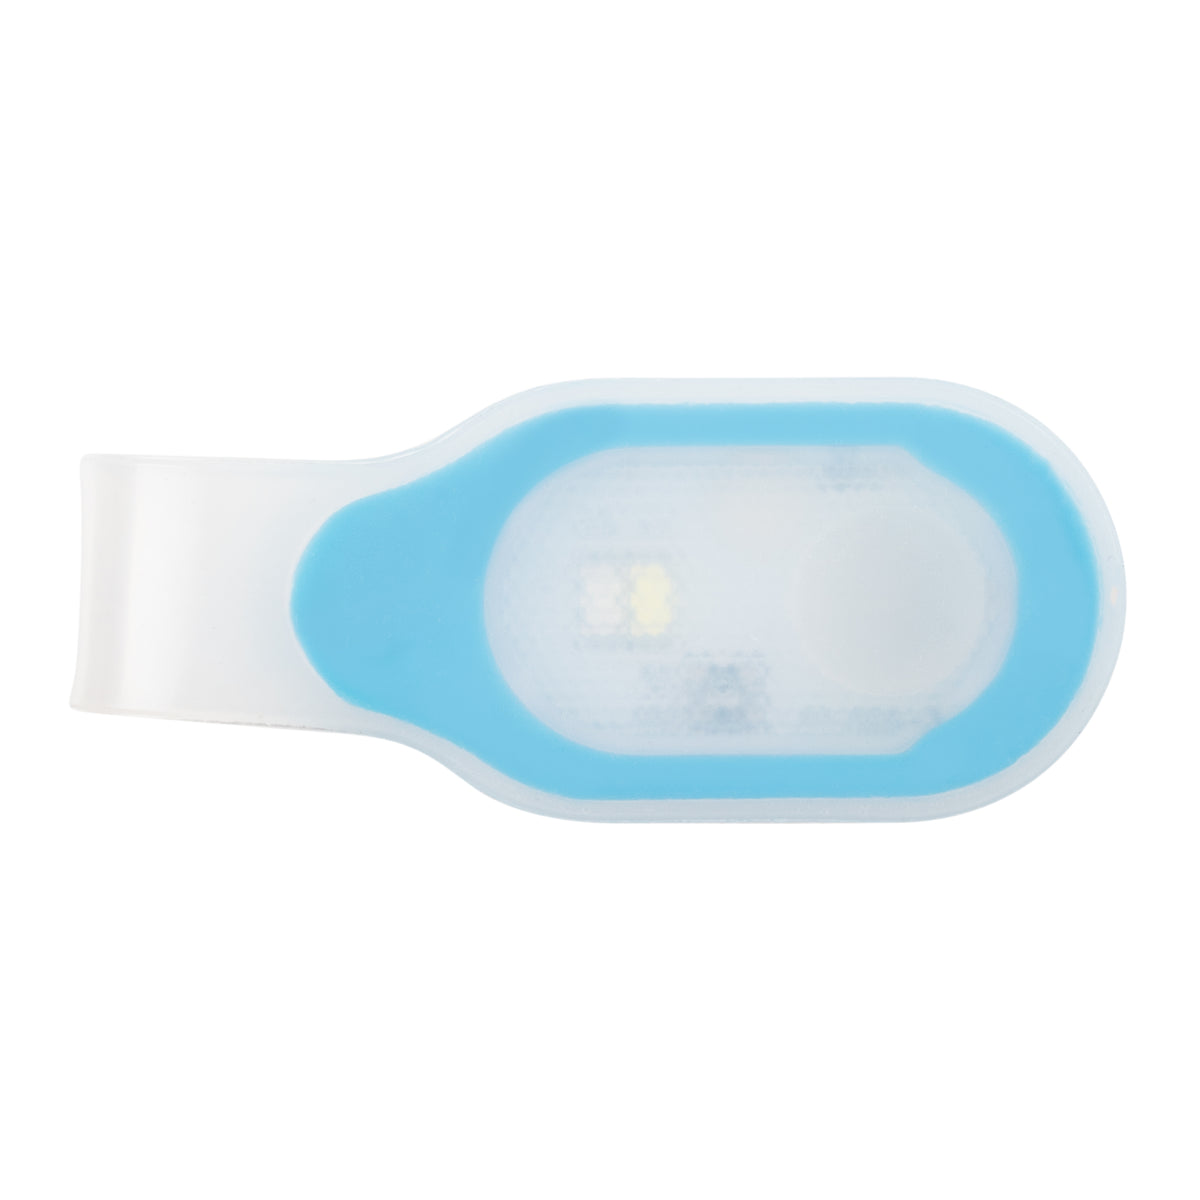 LED Wearable Lights for Nurses with Hands-Free Magnetic Clip for Clothing and Scrubs - Blue - First Lifesaver